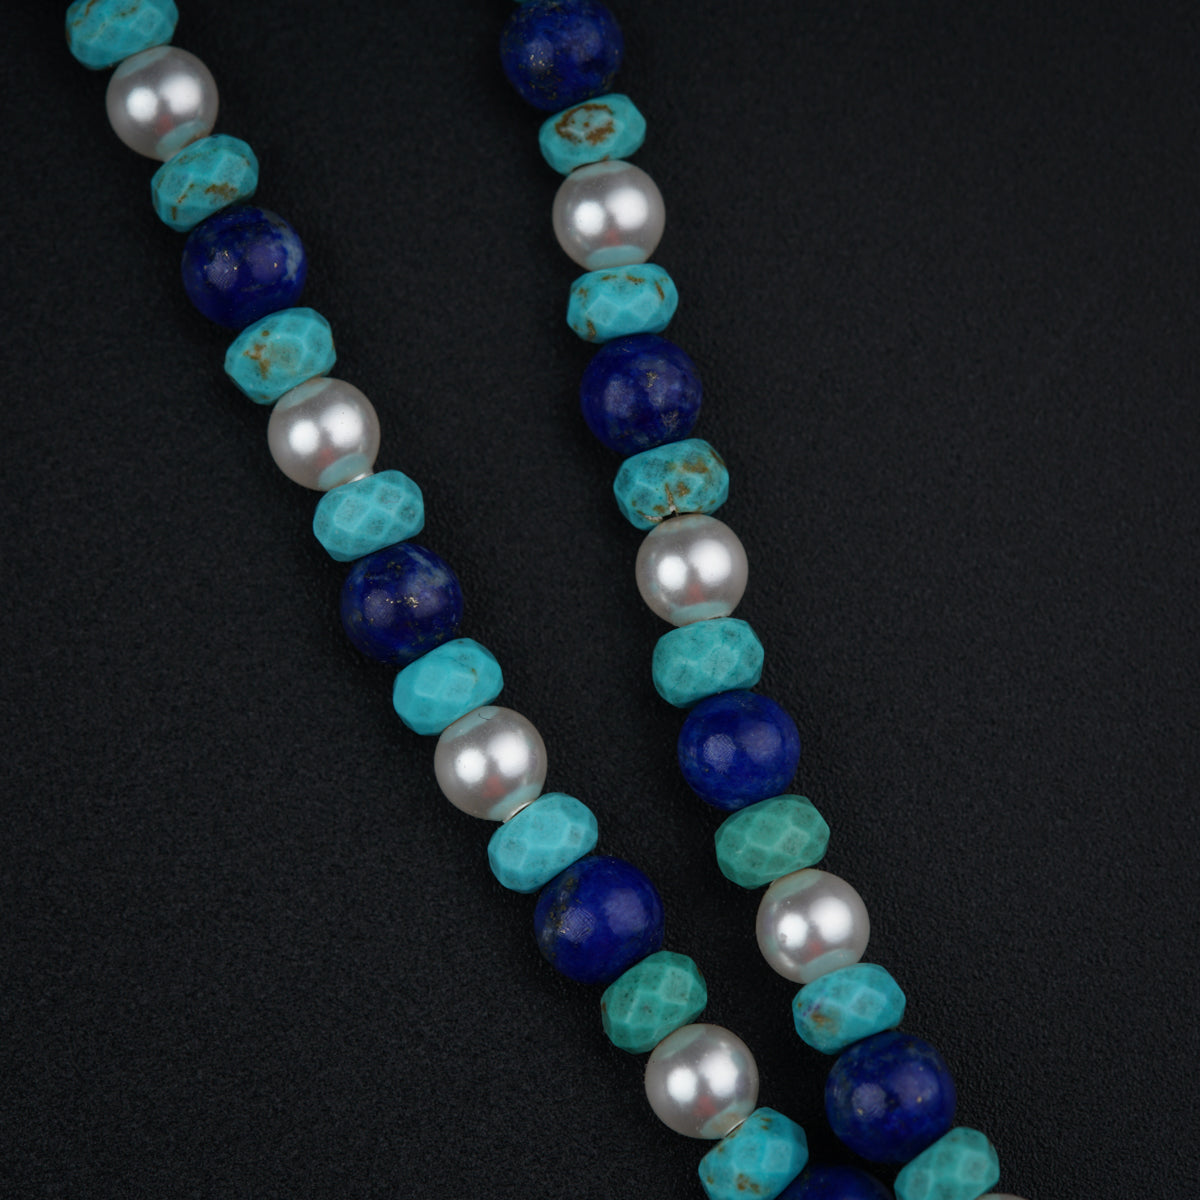 a necklace with pearls and blue beads on a black surface